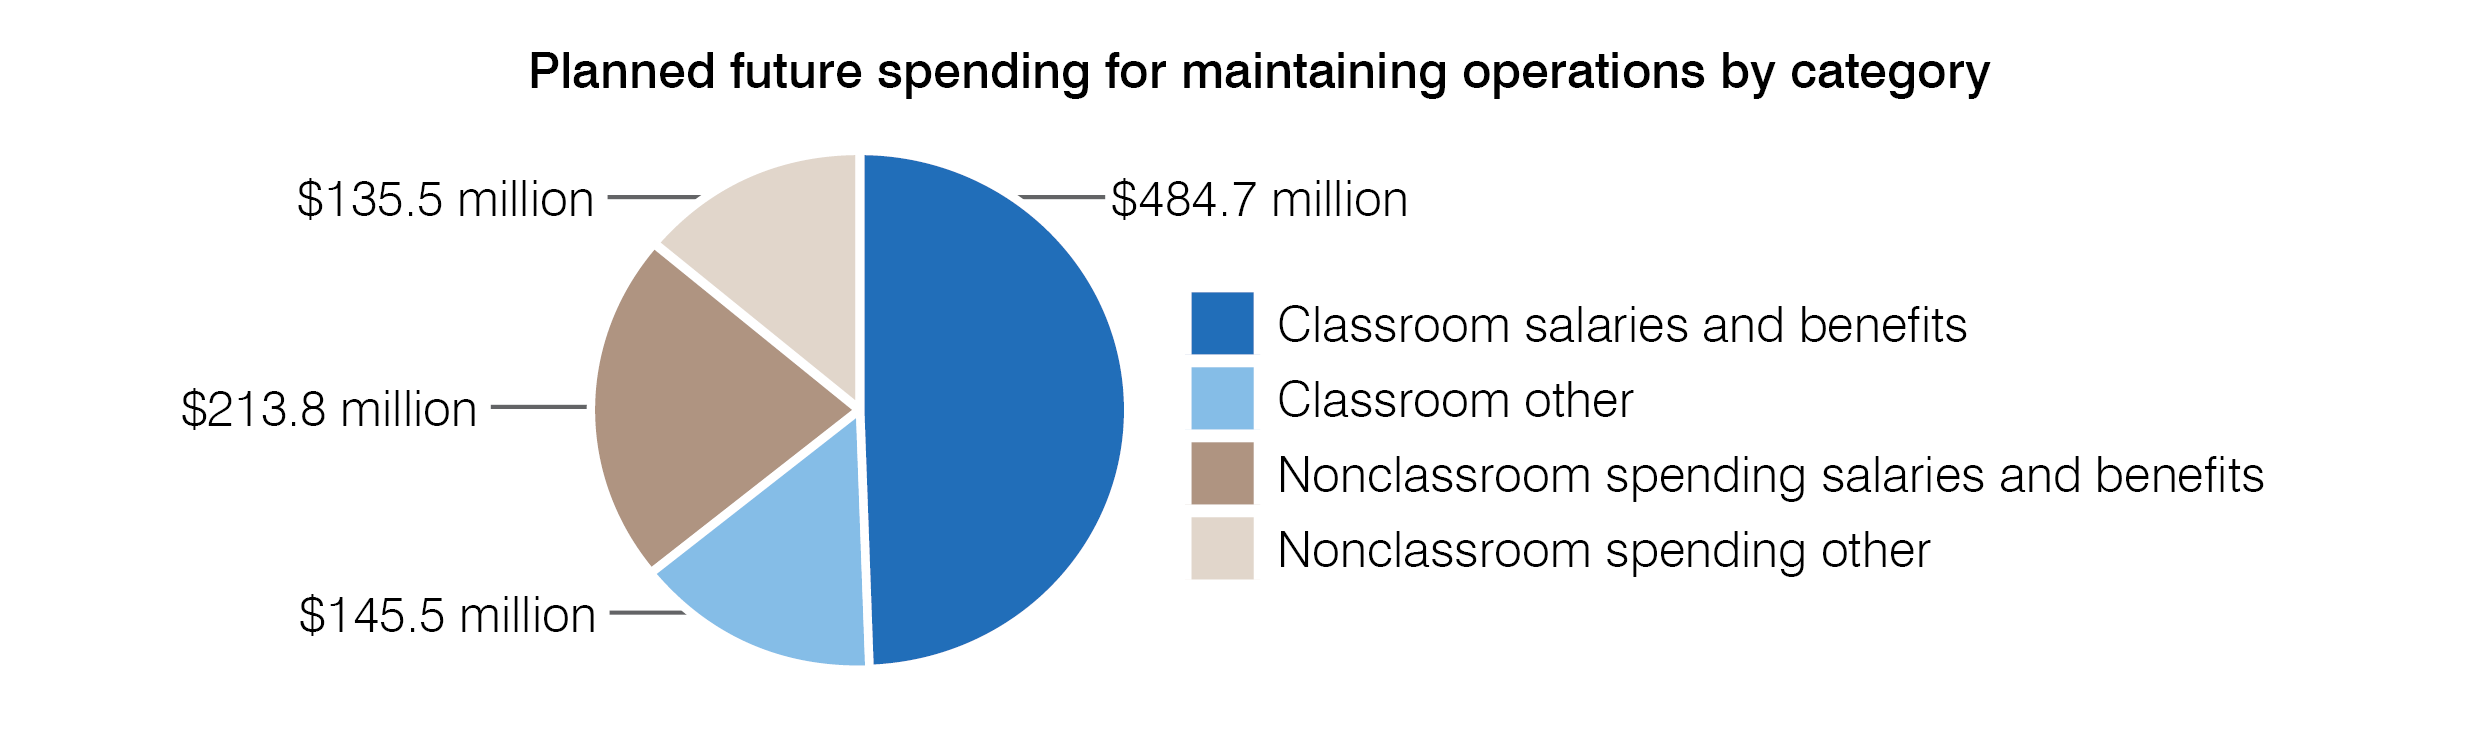 Maintaining operations planned future spending by category